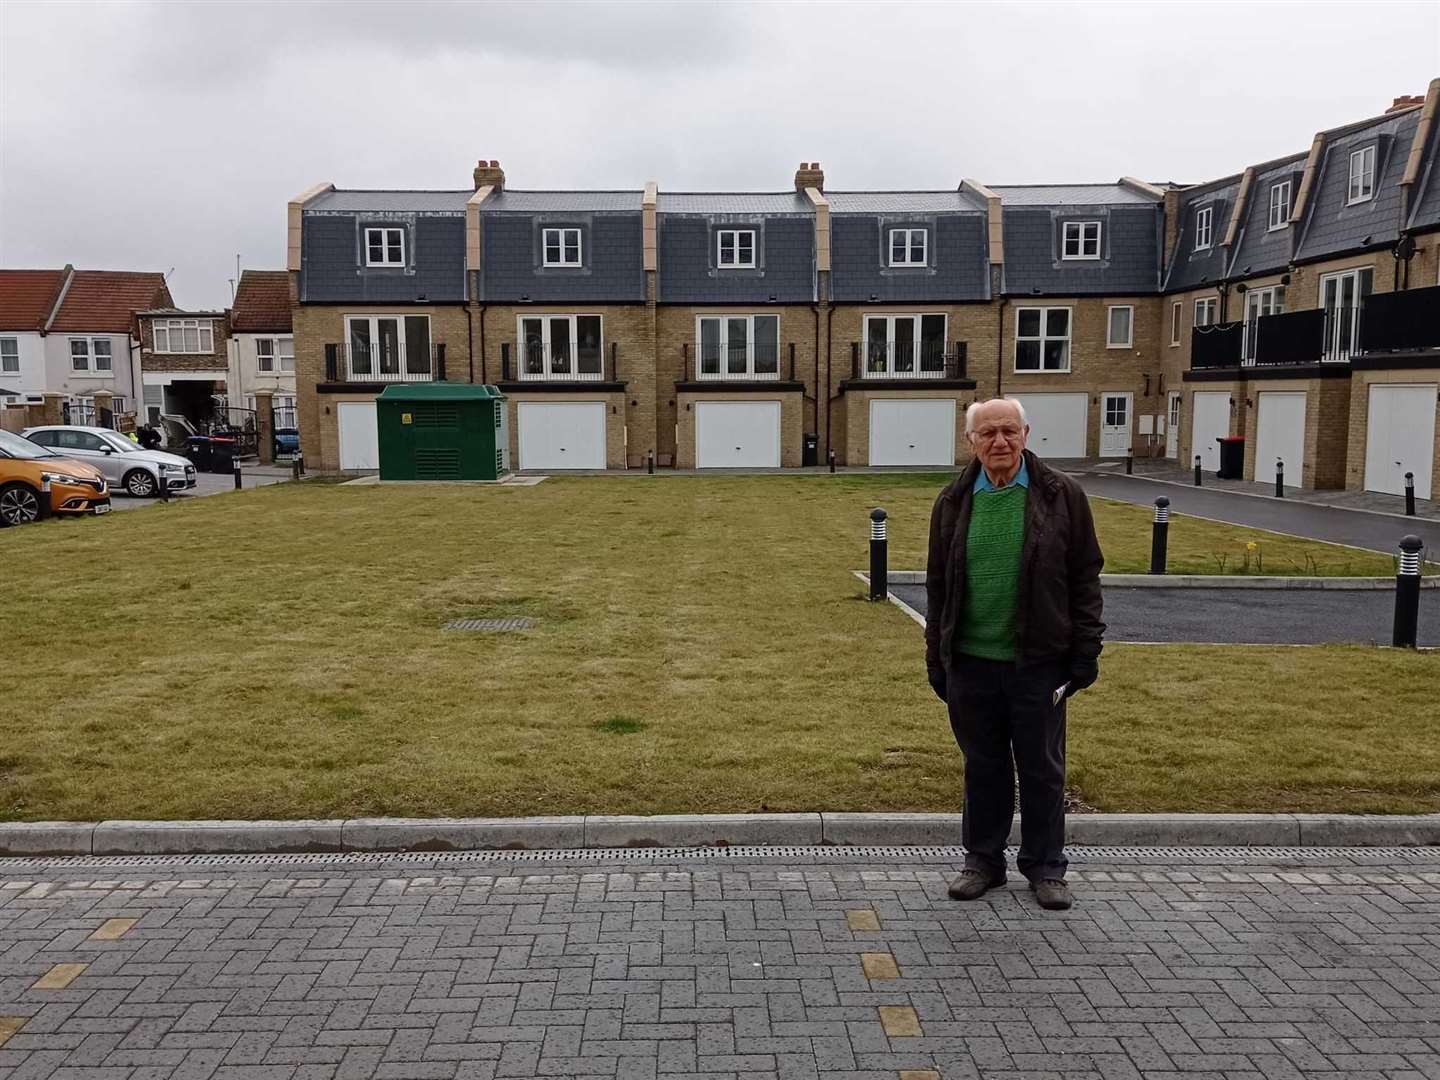 Michael Vince has written to Guildmore developer to complain about the green space at the Herne Bay estate. Photo: Michael Vince